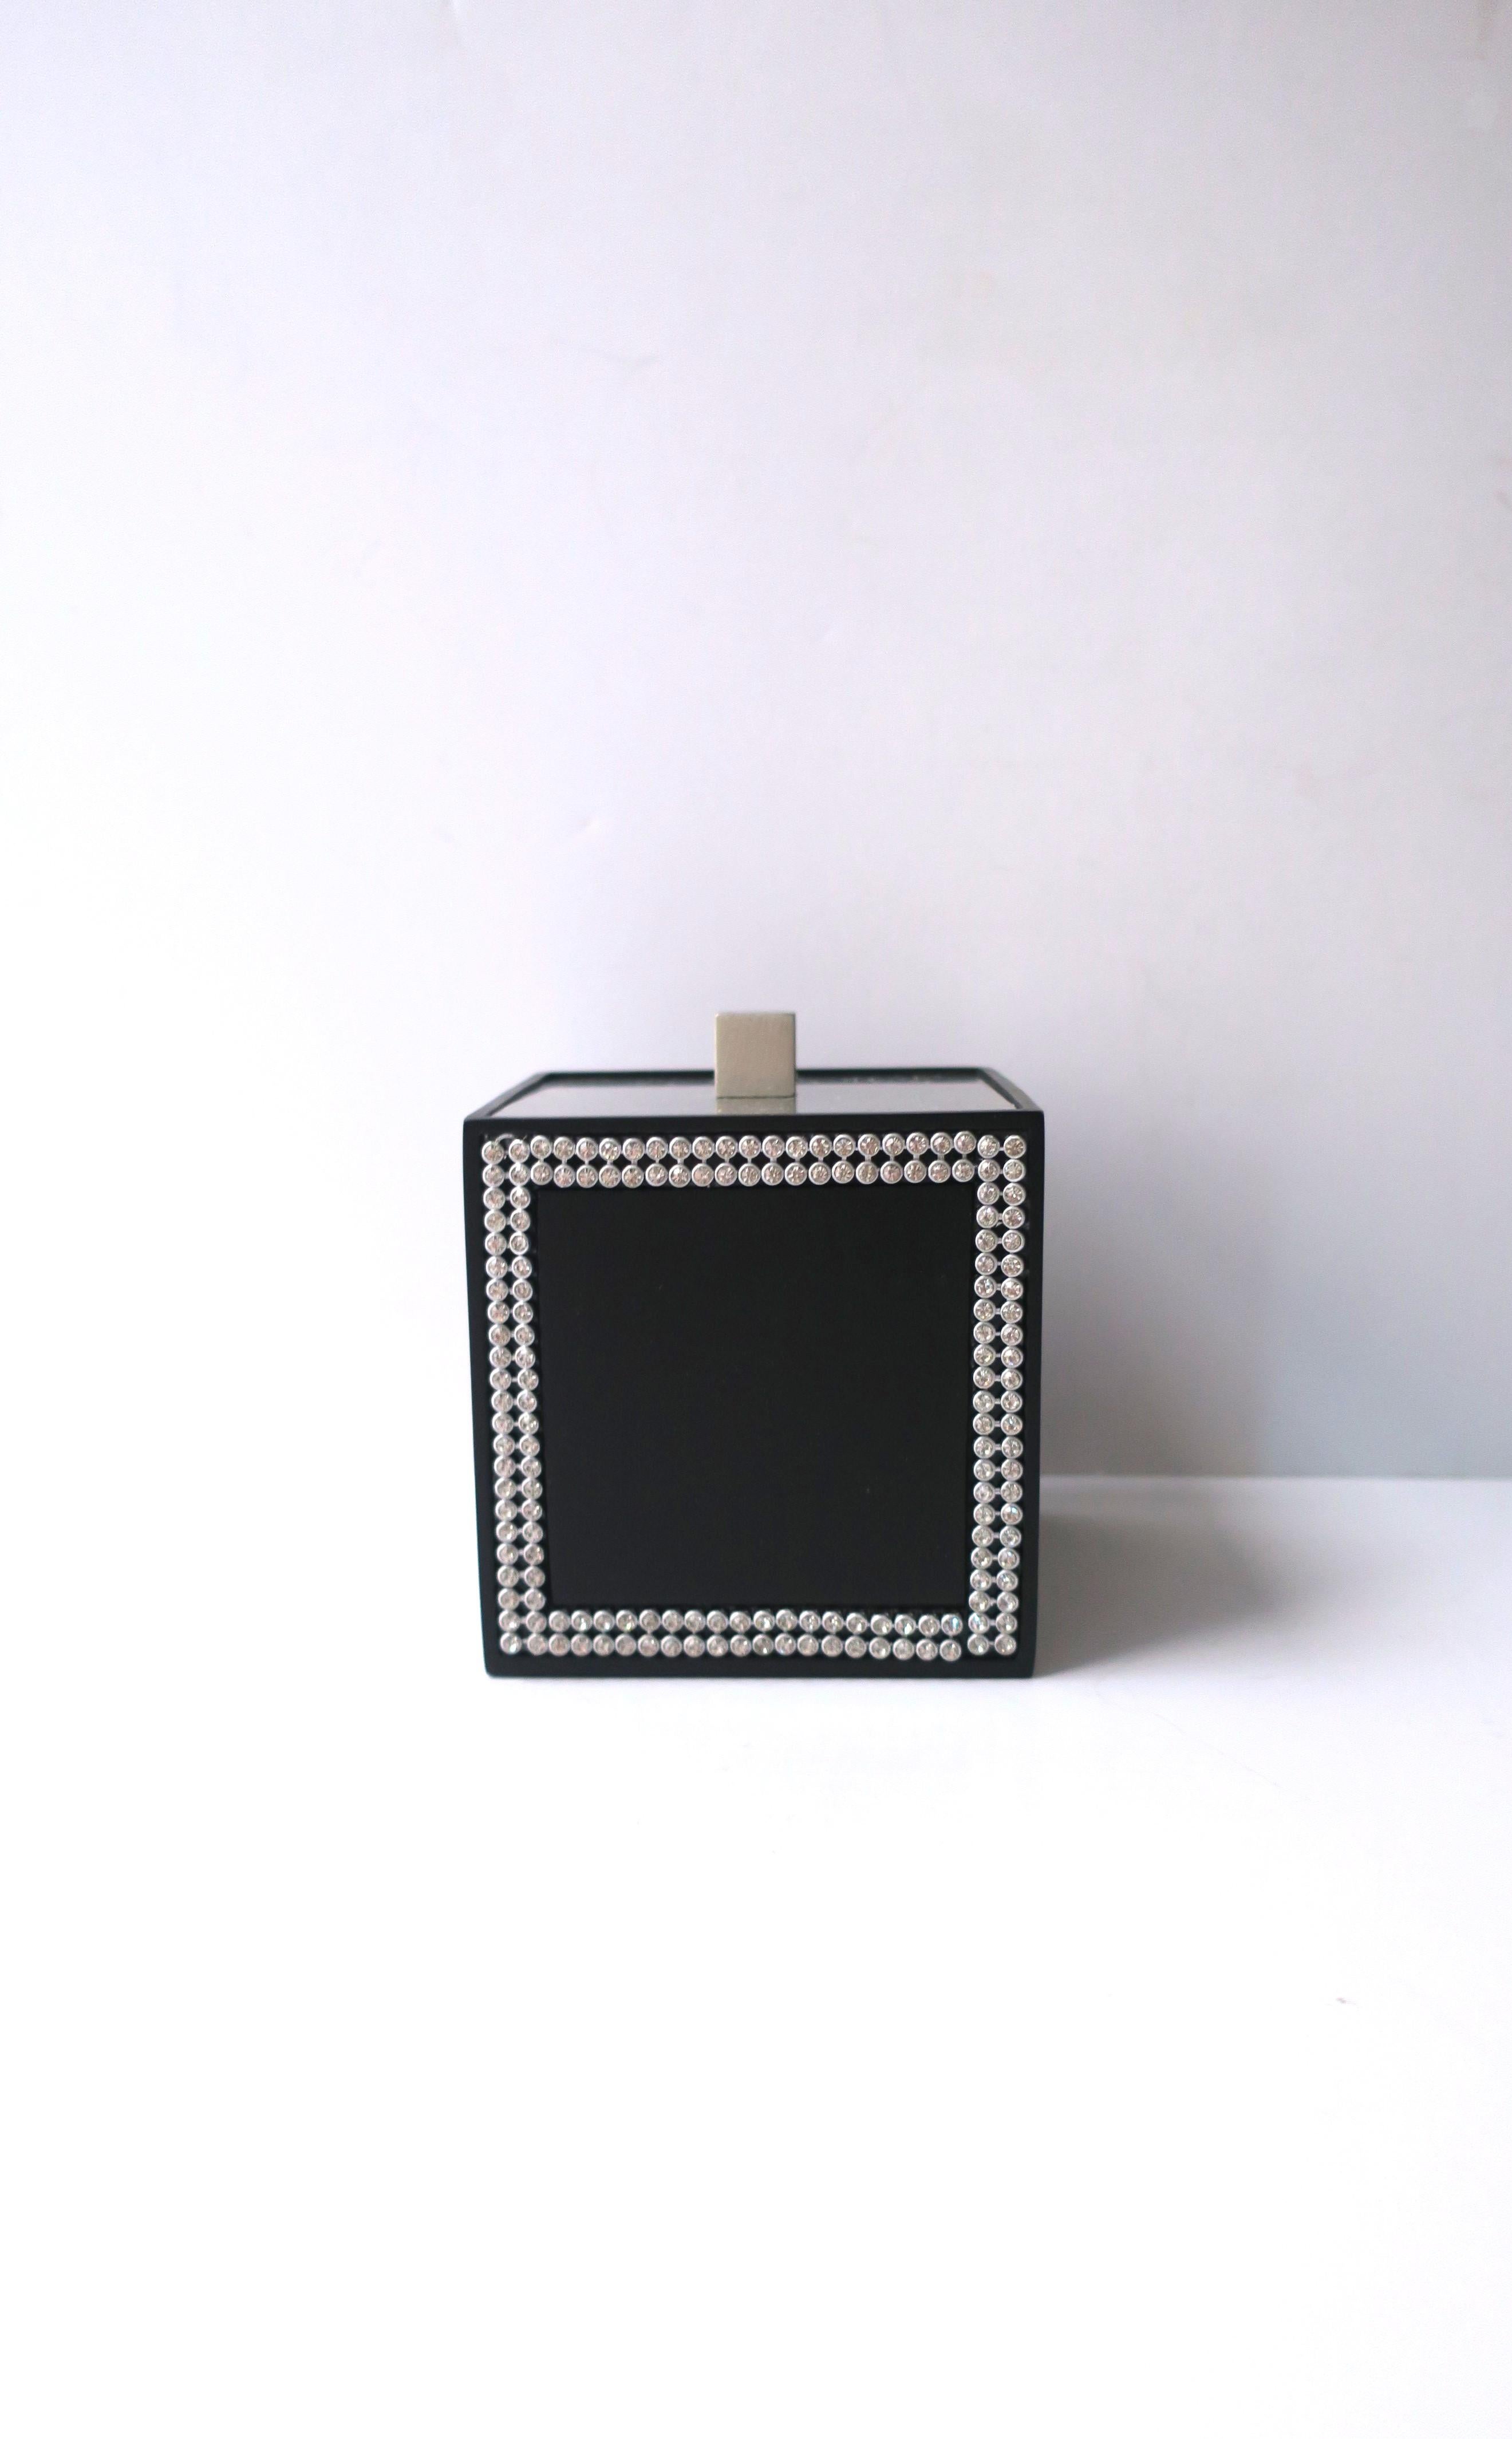 A black vanity box with faux-diamond design. Box is a black powder-coated metal with faux diamond design, on two sides, finished with a metal lid with square knob. Piece has never been used. A great piece for a vanity, bathroom, powder room, walk-in